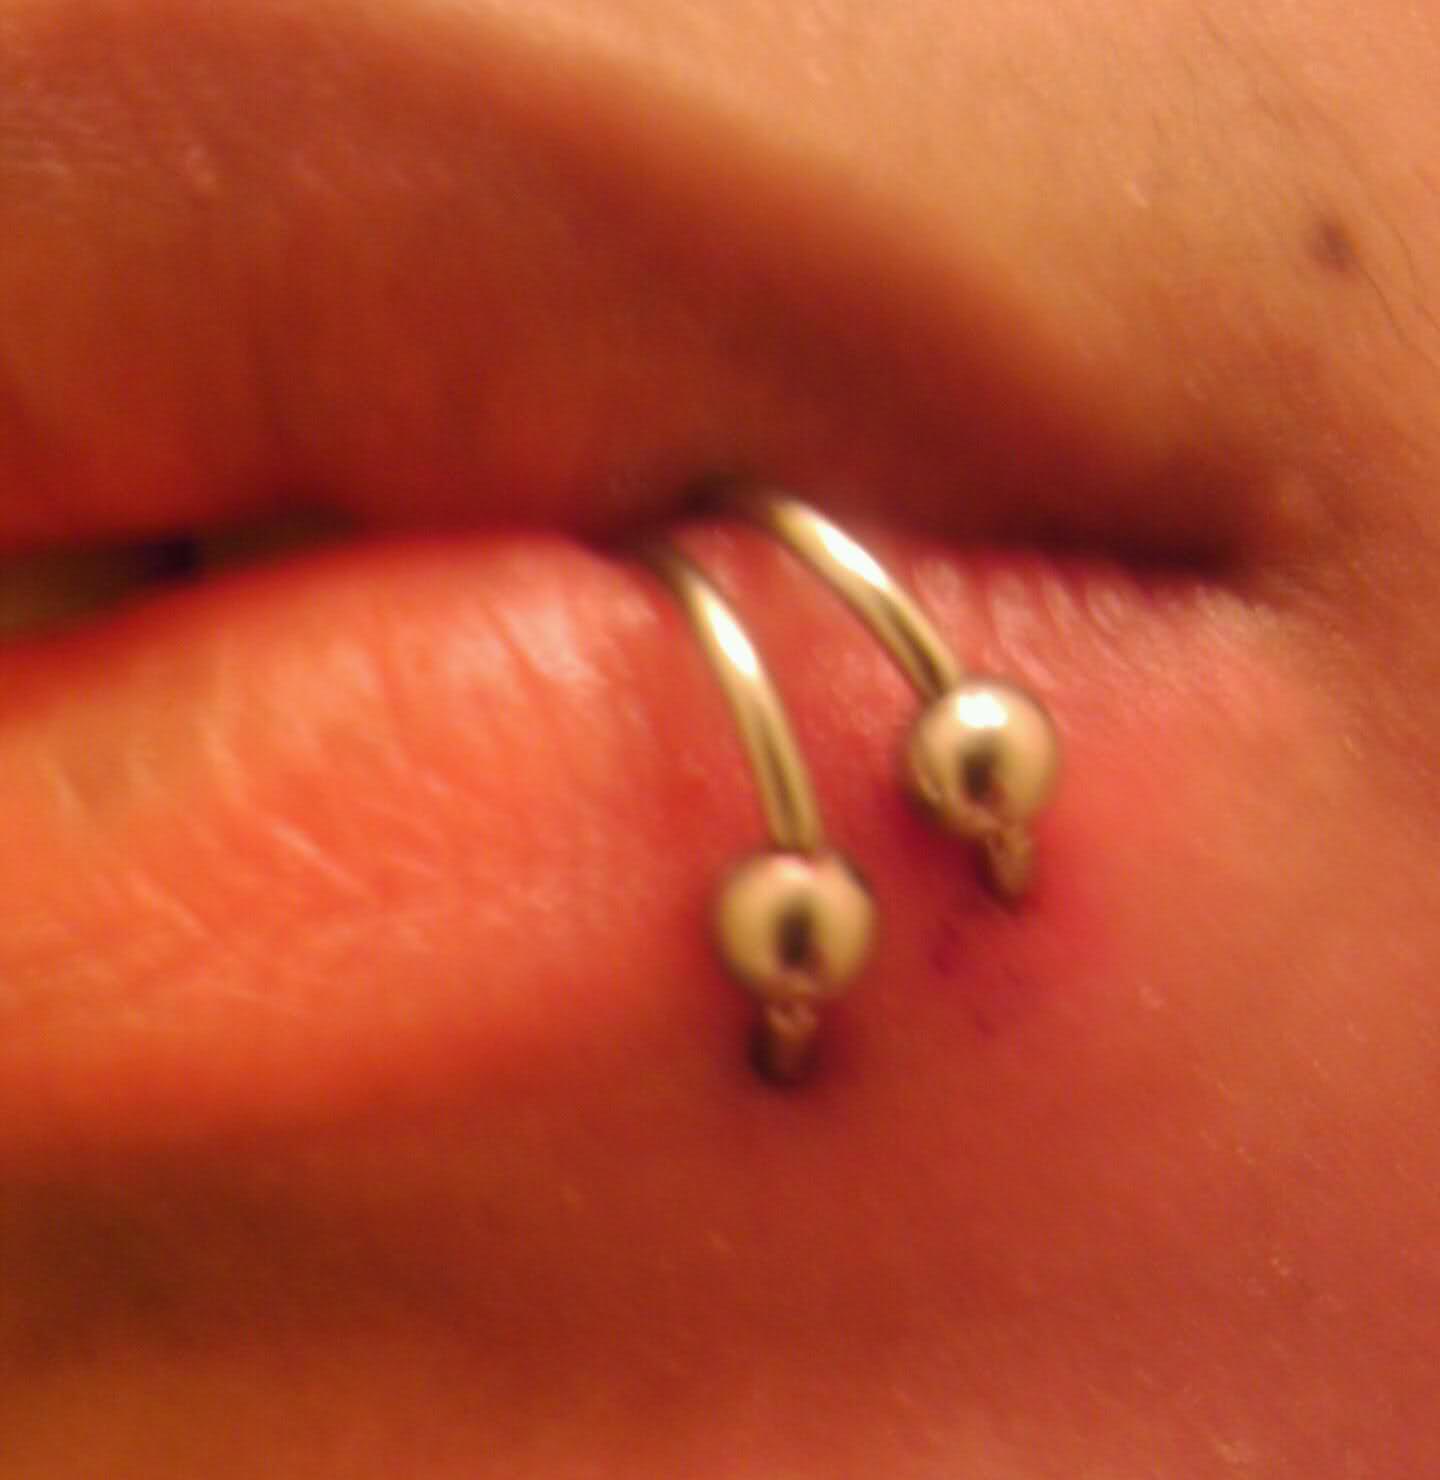 Silver Bead Rings Lip Piercing Picture